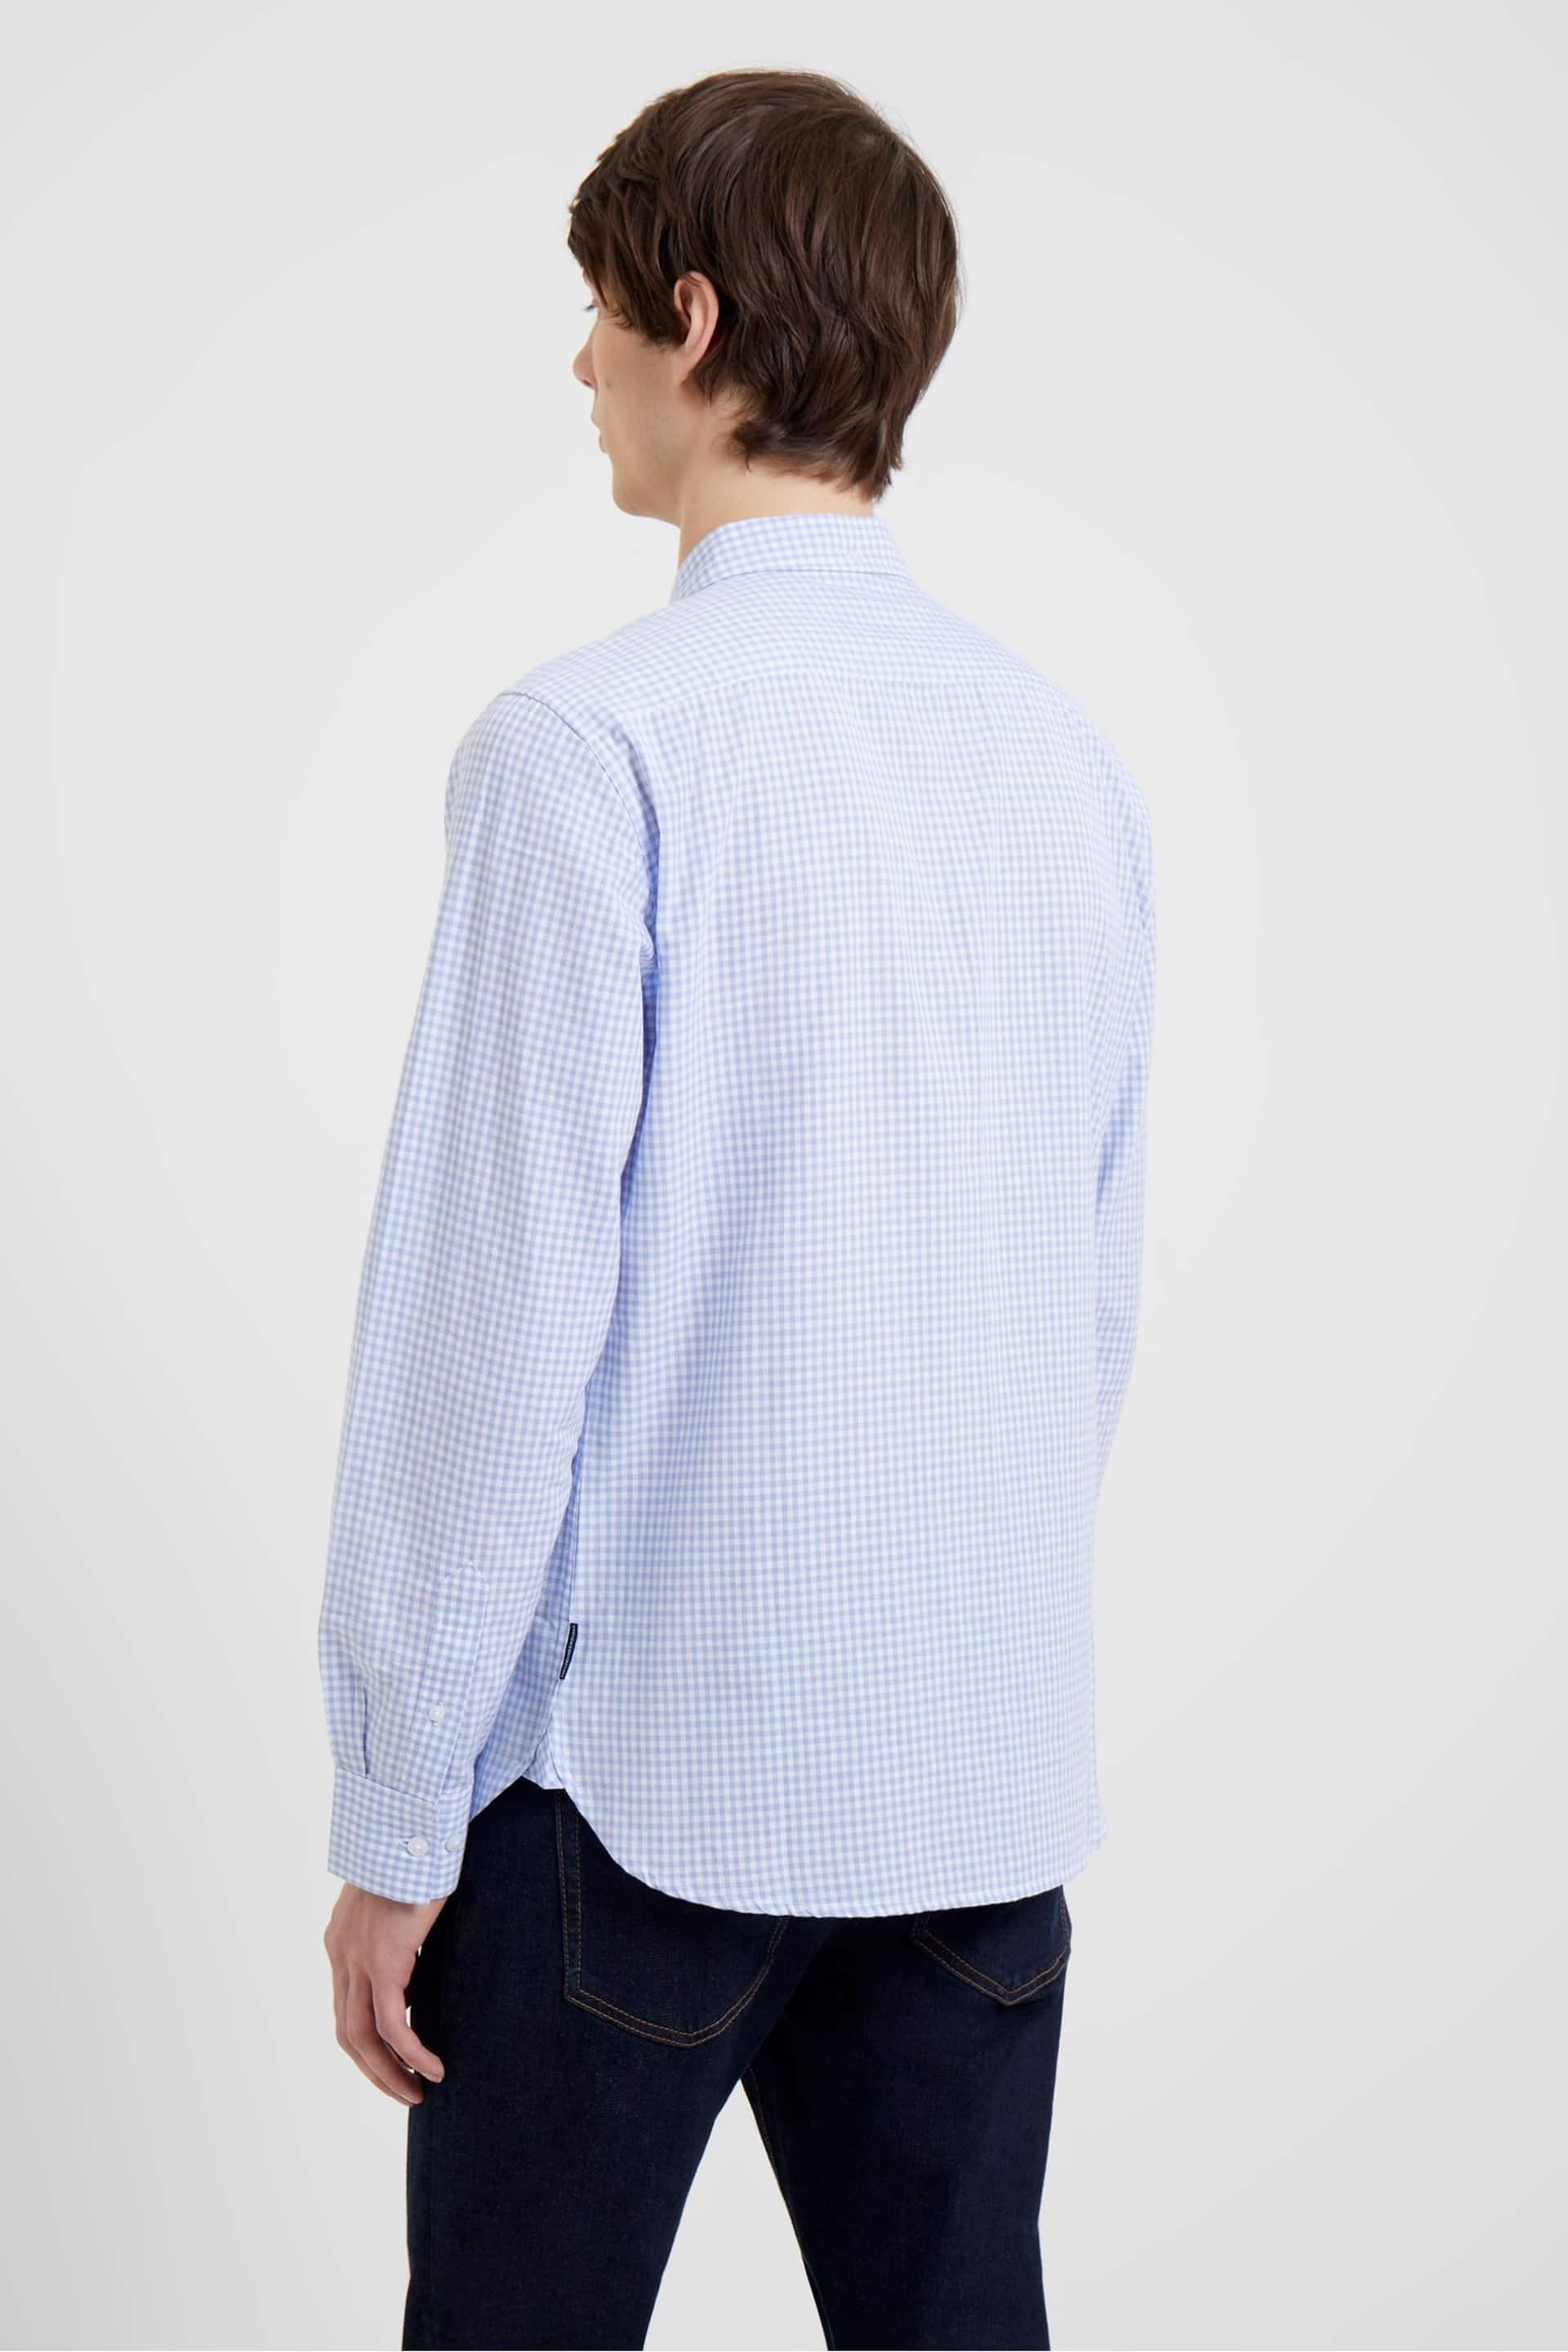 French Connection Sky Gingham Long Sleeve Shirt - Image 2 of 3